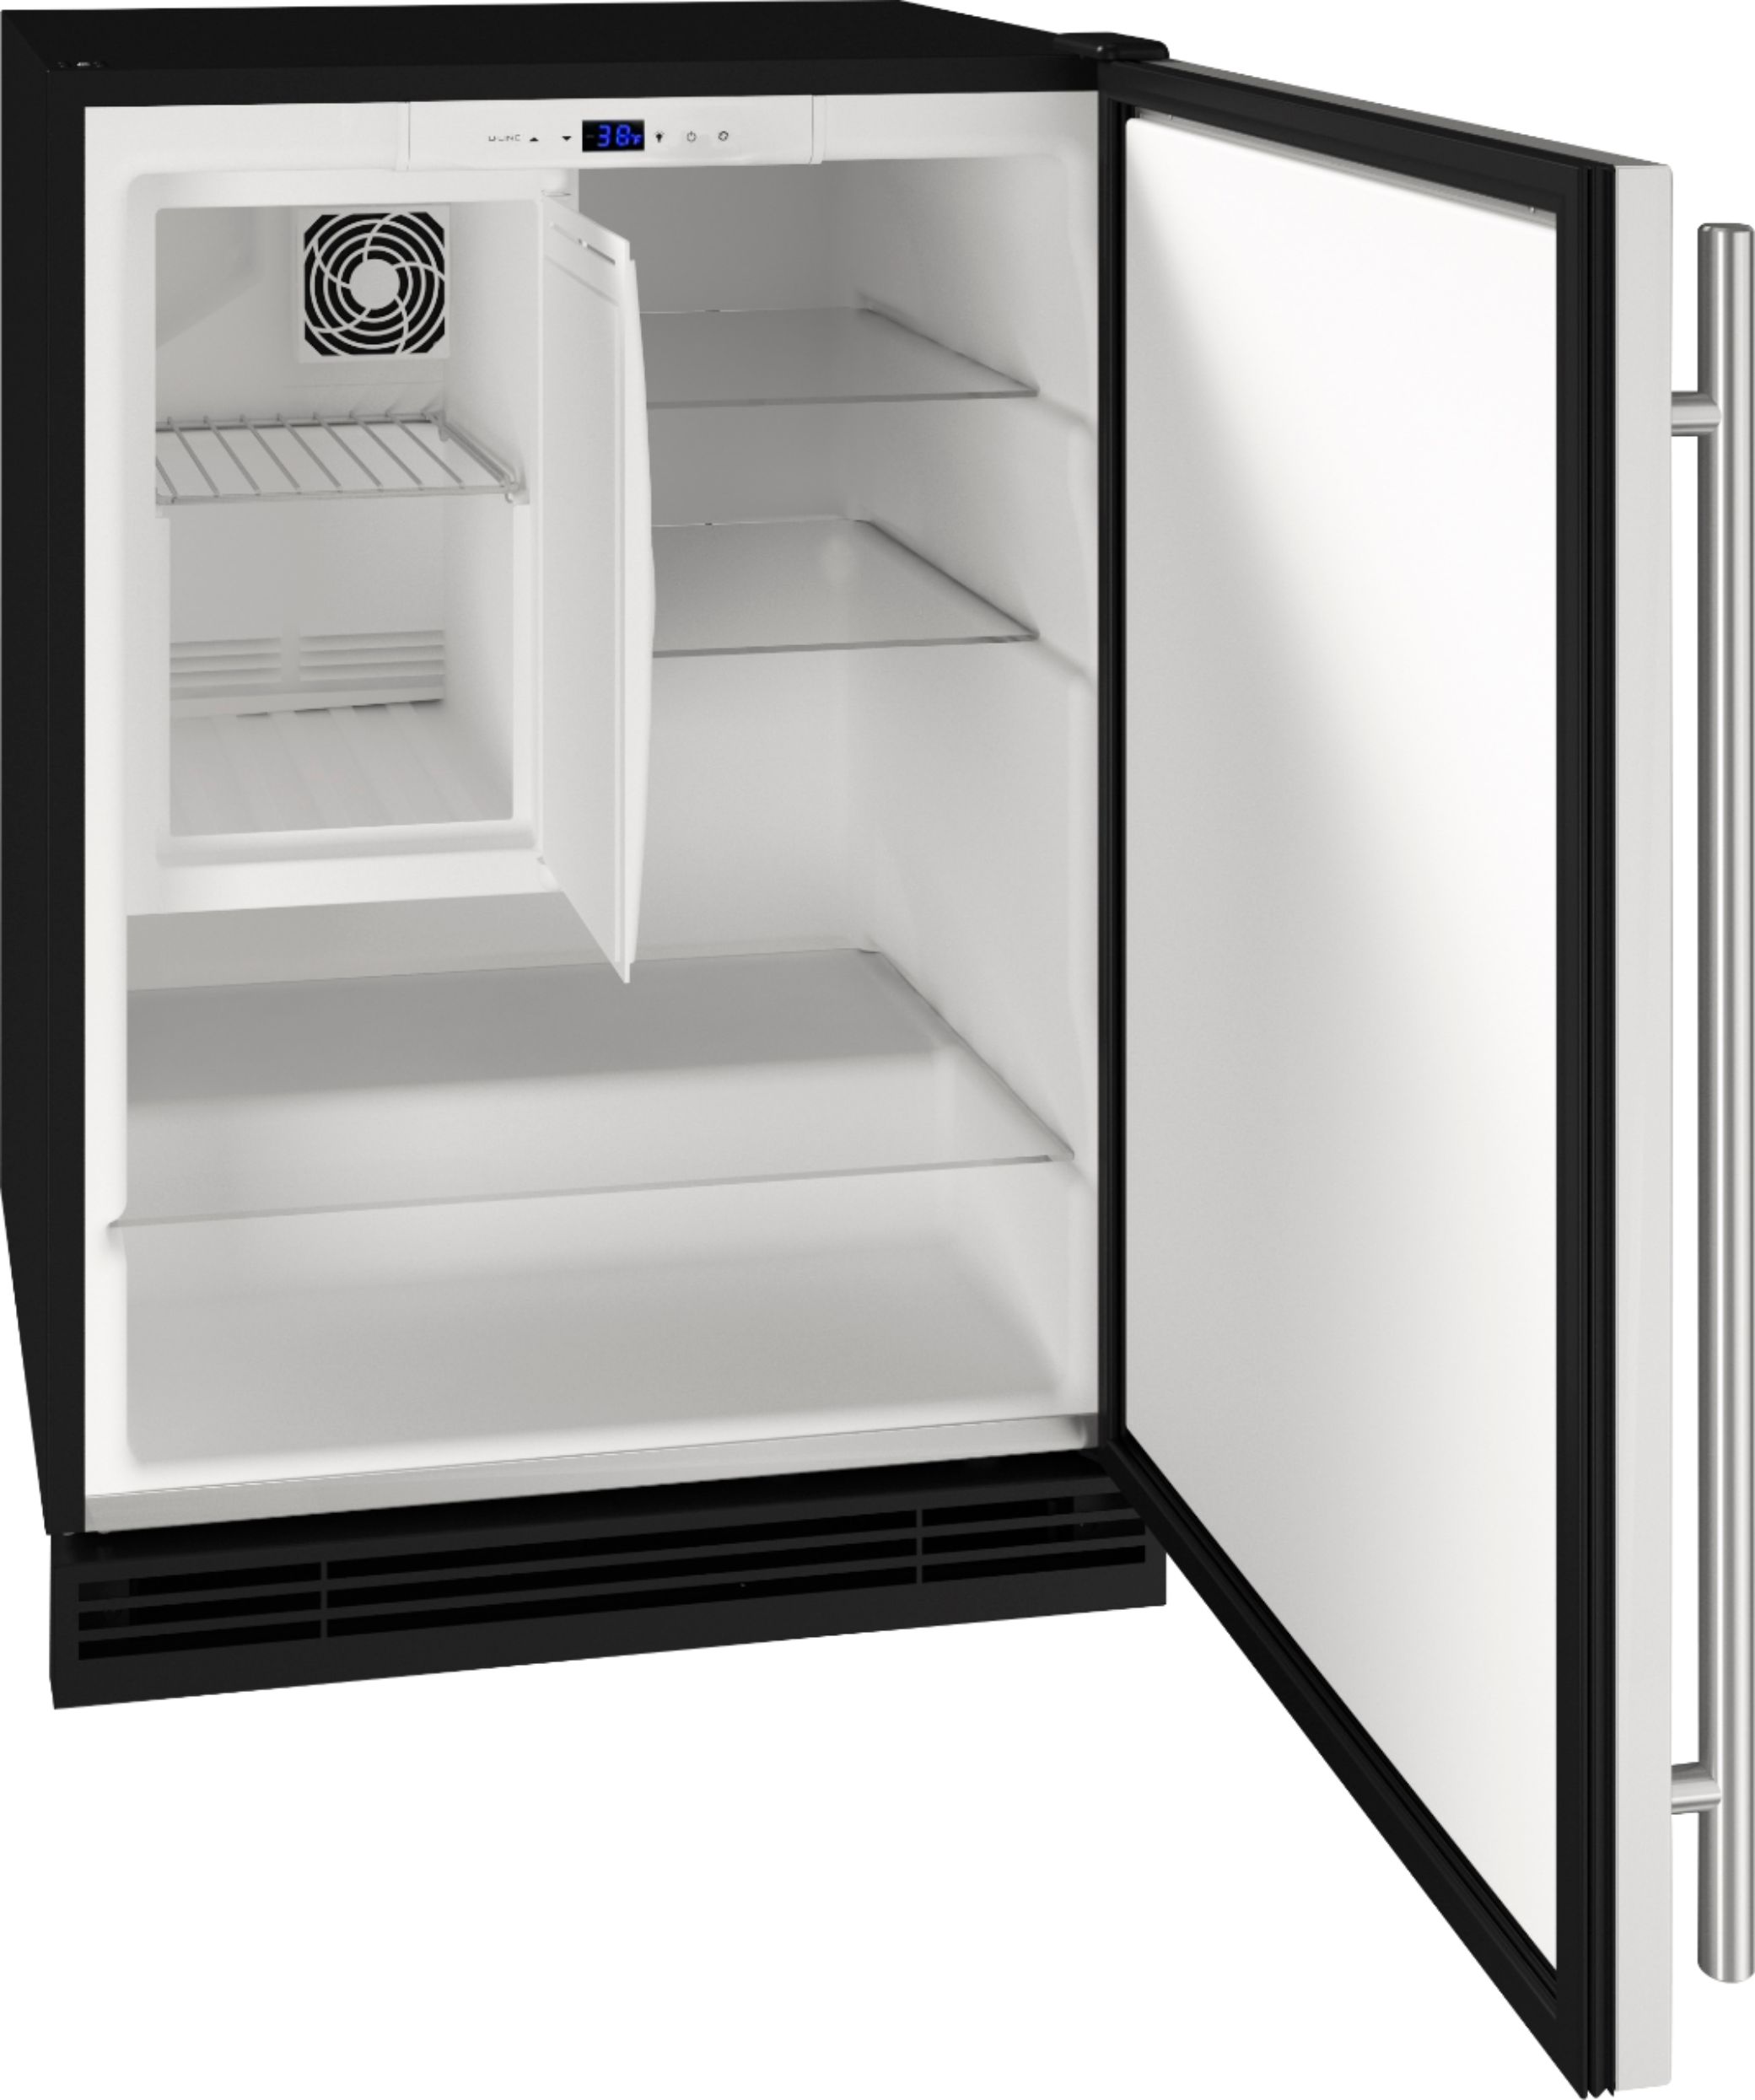 Undercounter Refrigerator Reviews: Top Models Rated!